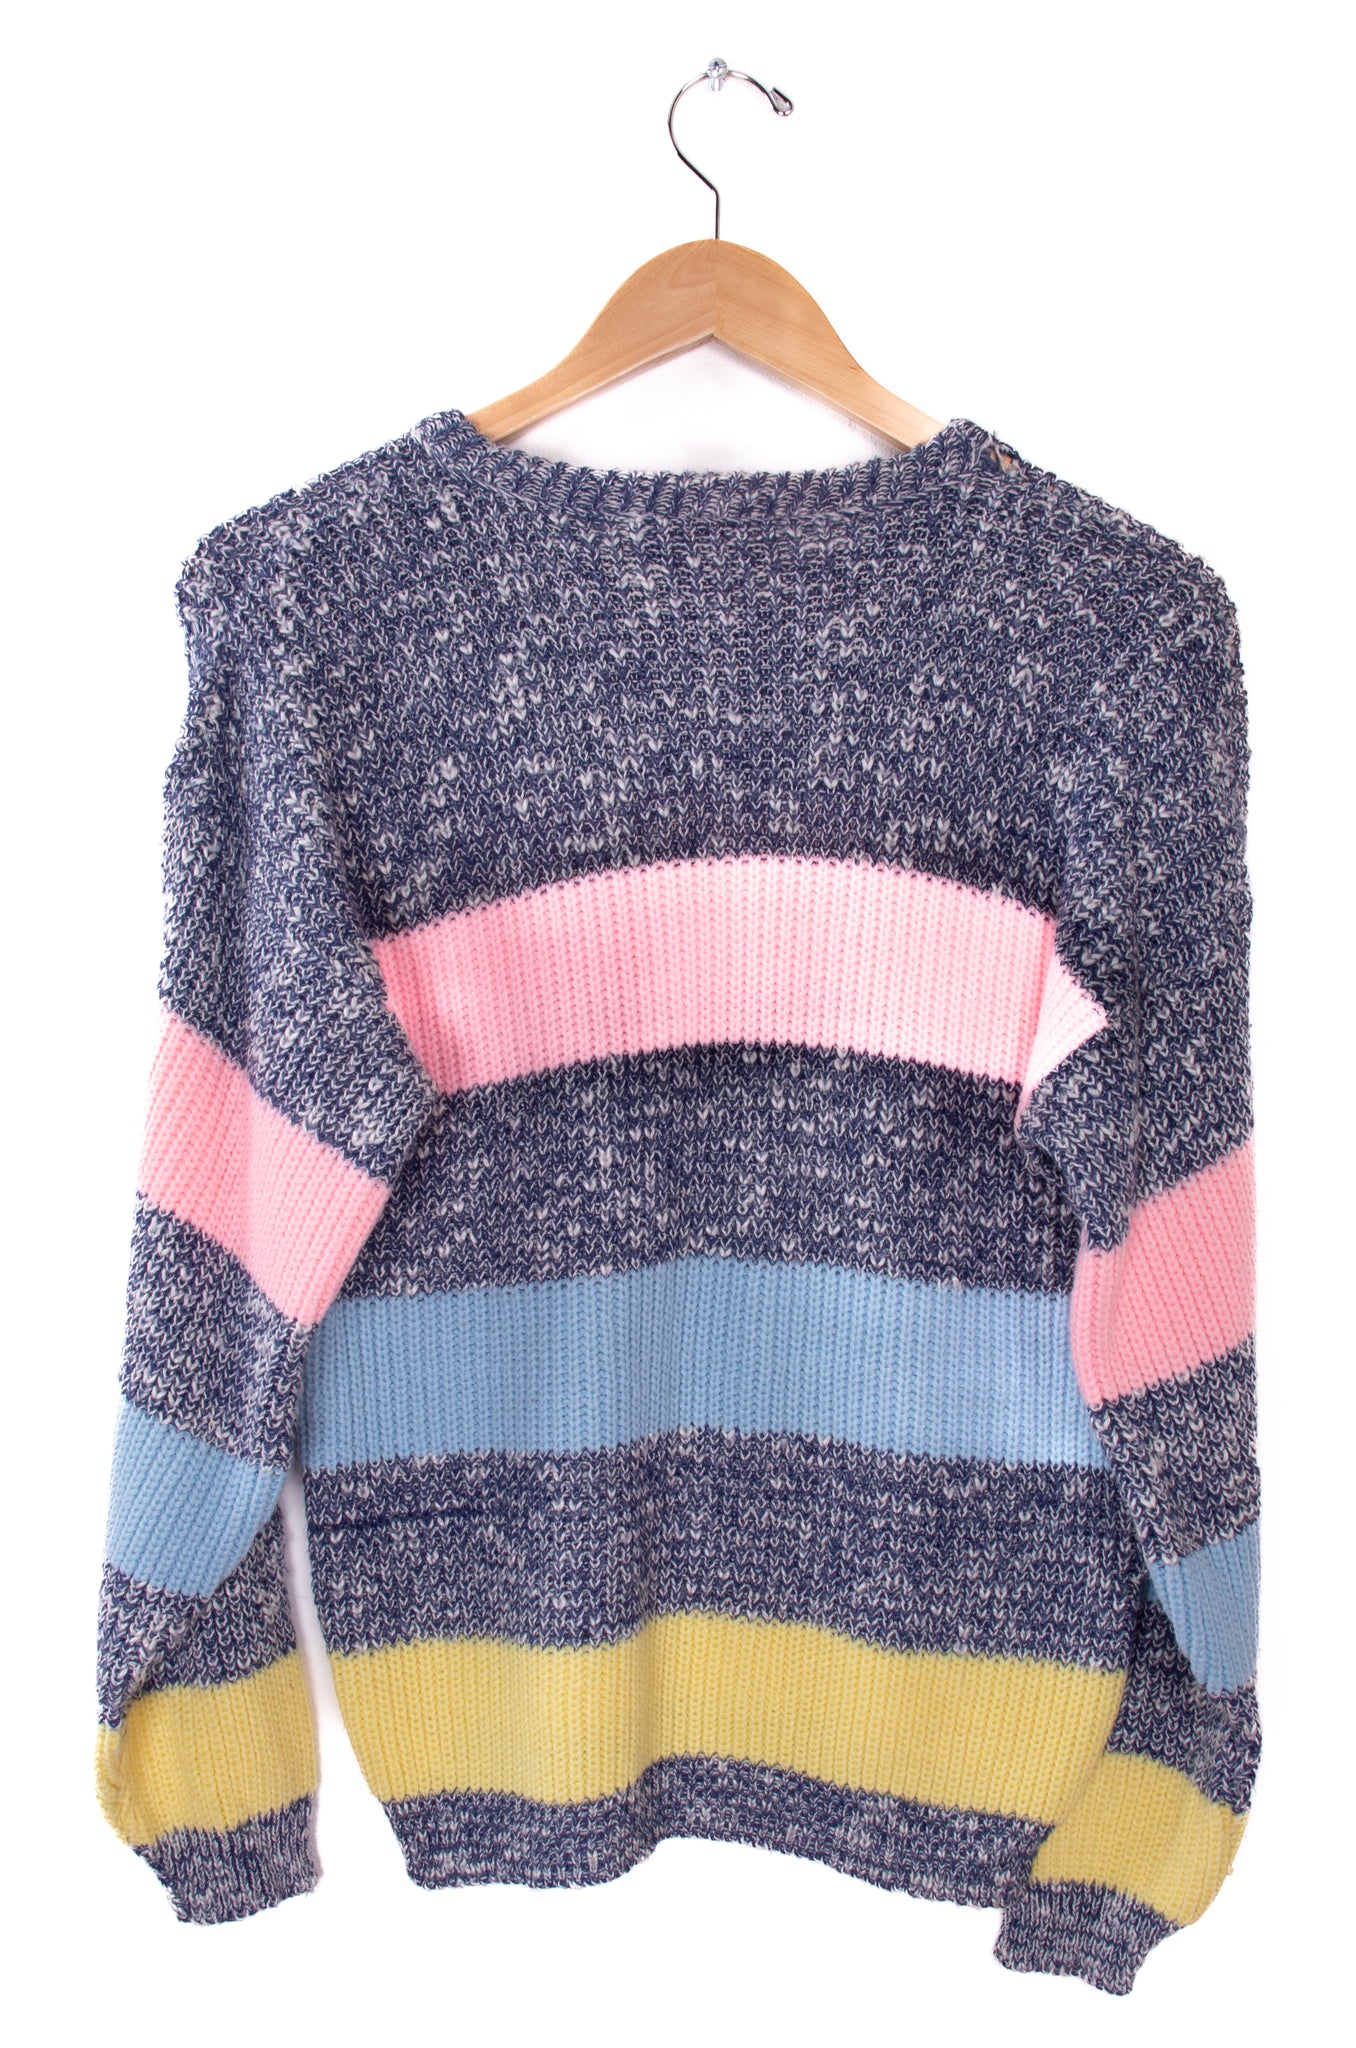 Weathered Blues Pink, Blue, and Yellow Striped Sweater